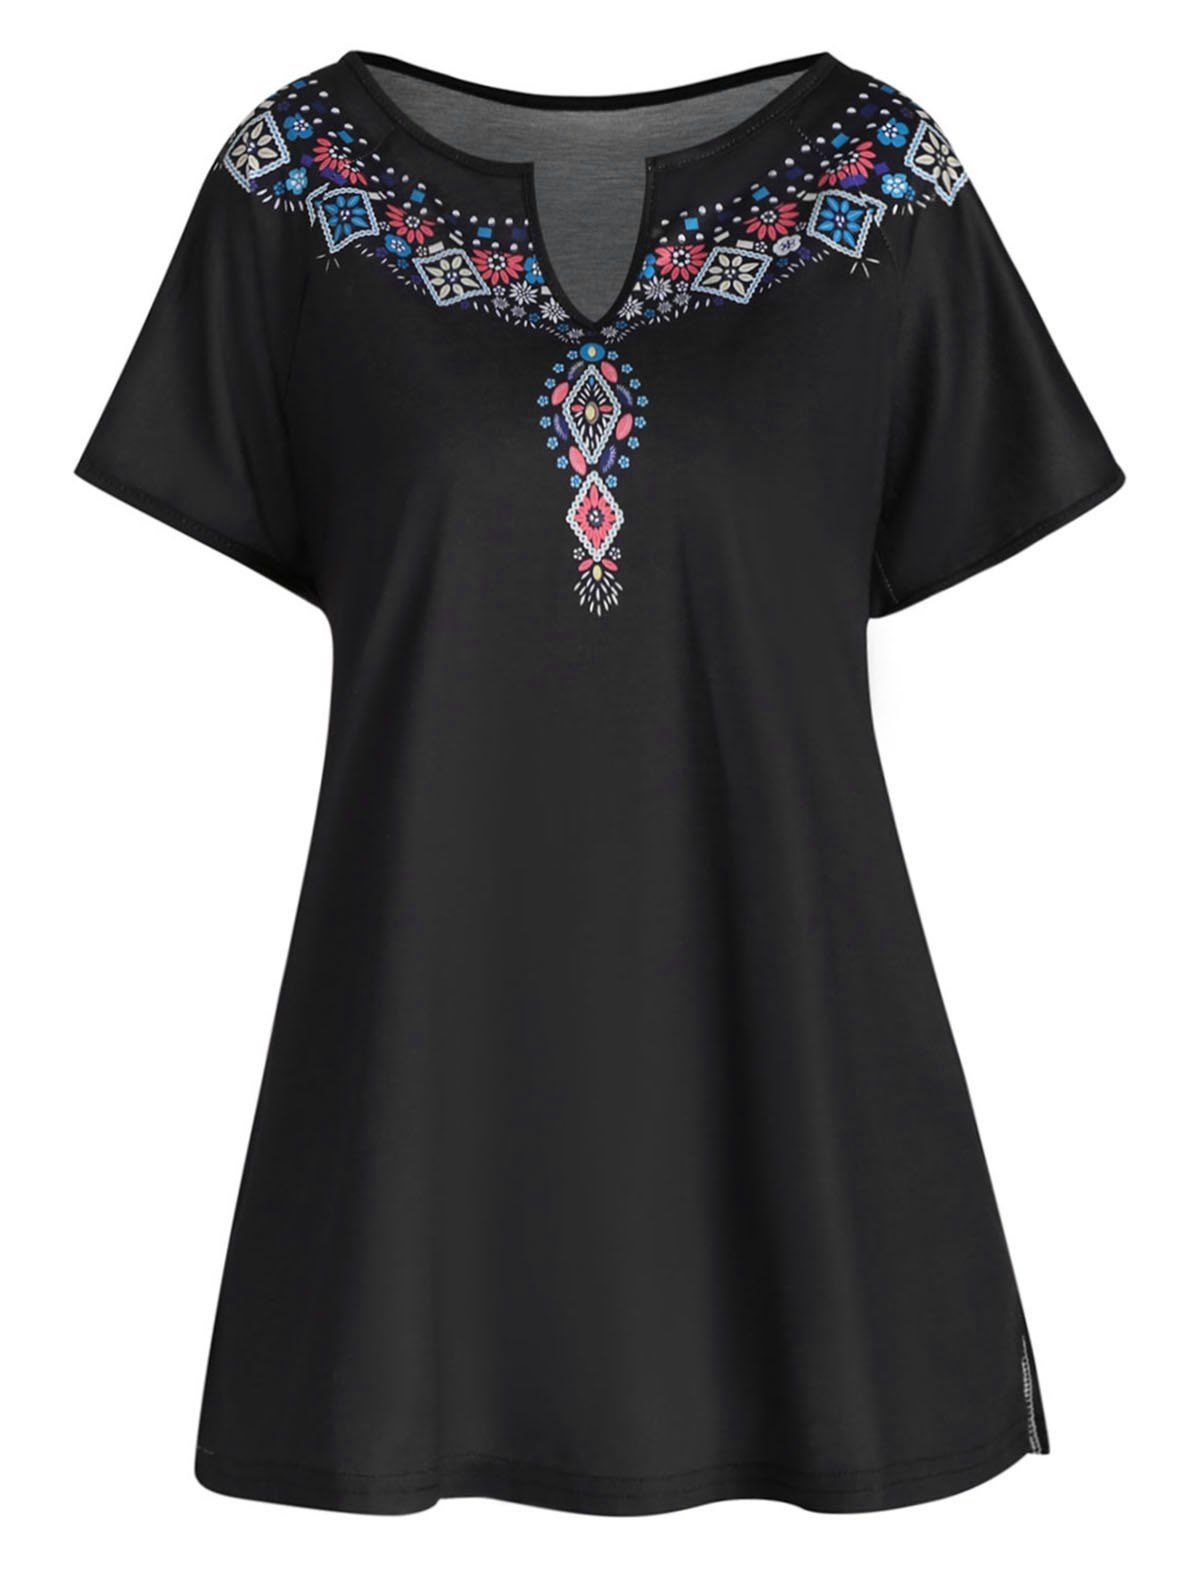 Ethnic Style T Shirt Flower Printed Notched Ralgan Sleeve Casual Tee - BLACK 3XL